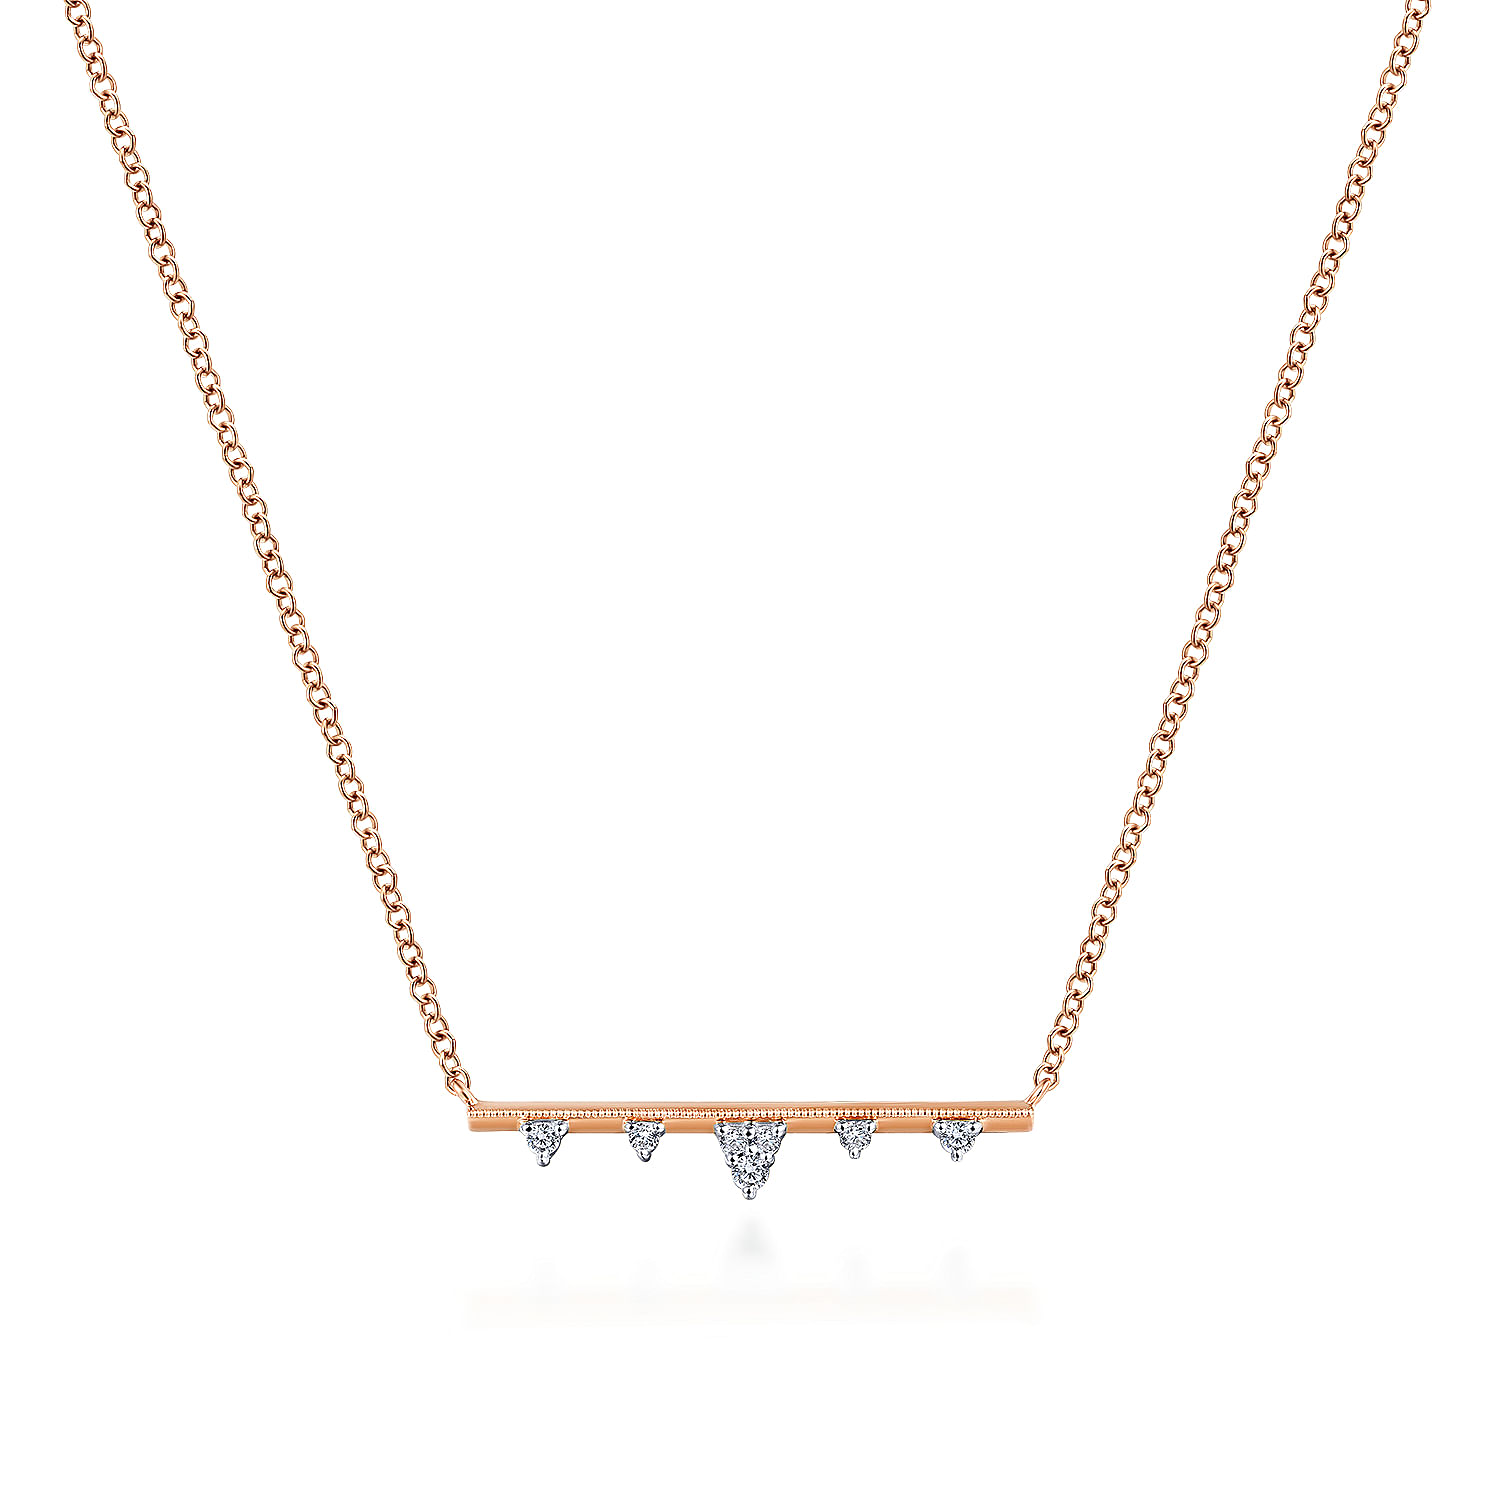 14K Rose Gold Bar Necklace with Diamond Triangle Stations